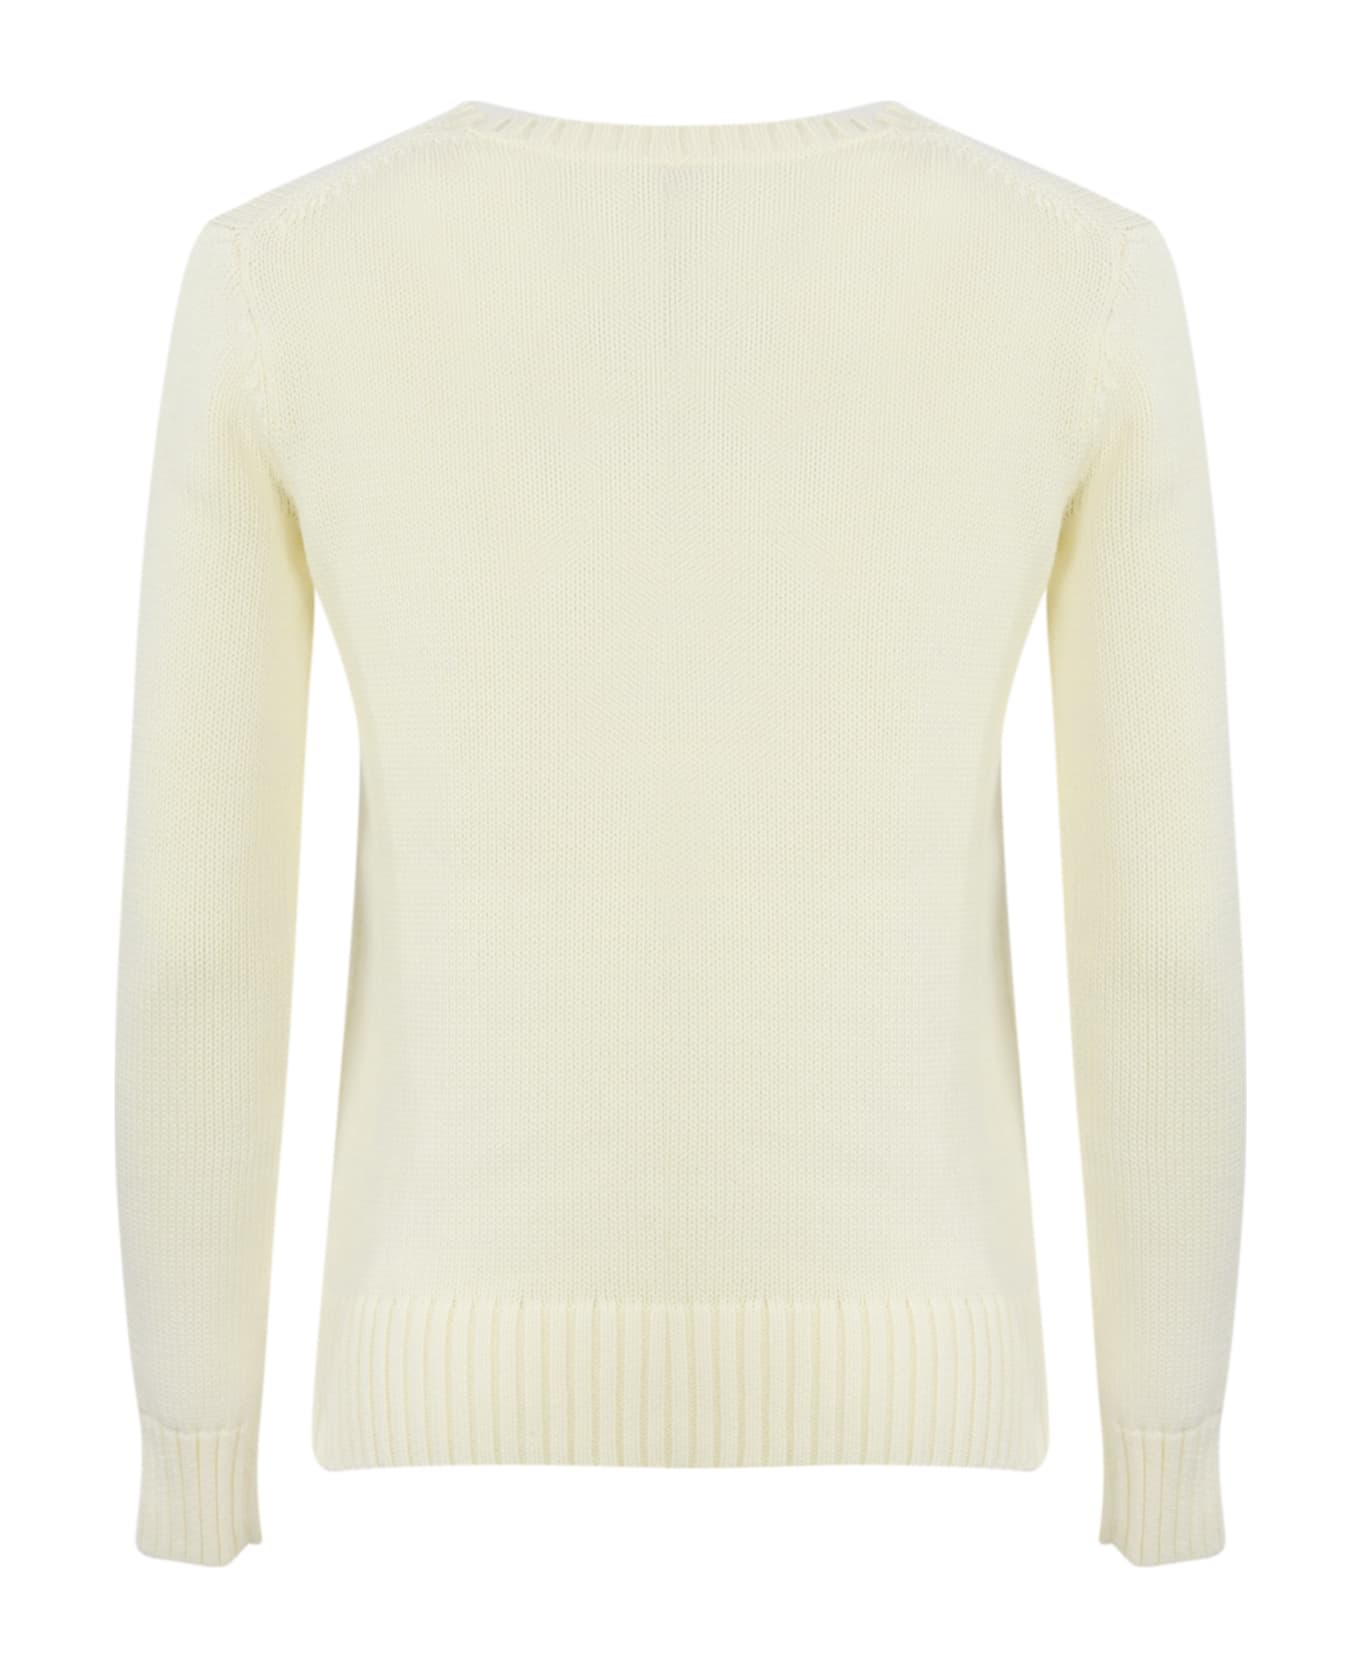 Polo Ralph Lauren Sweater With Polo Bear Embroidery - Cream